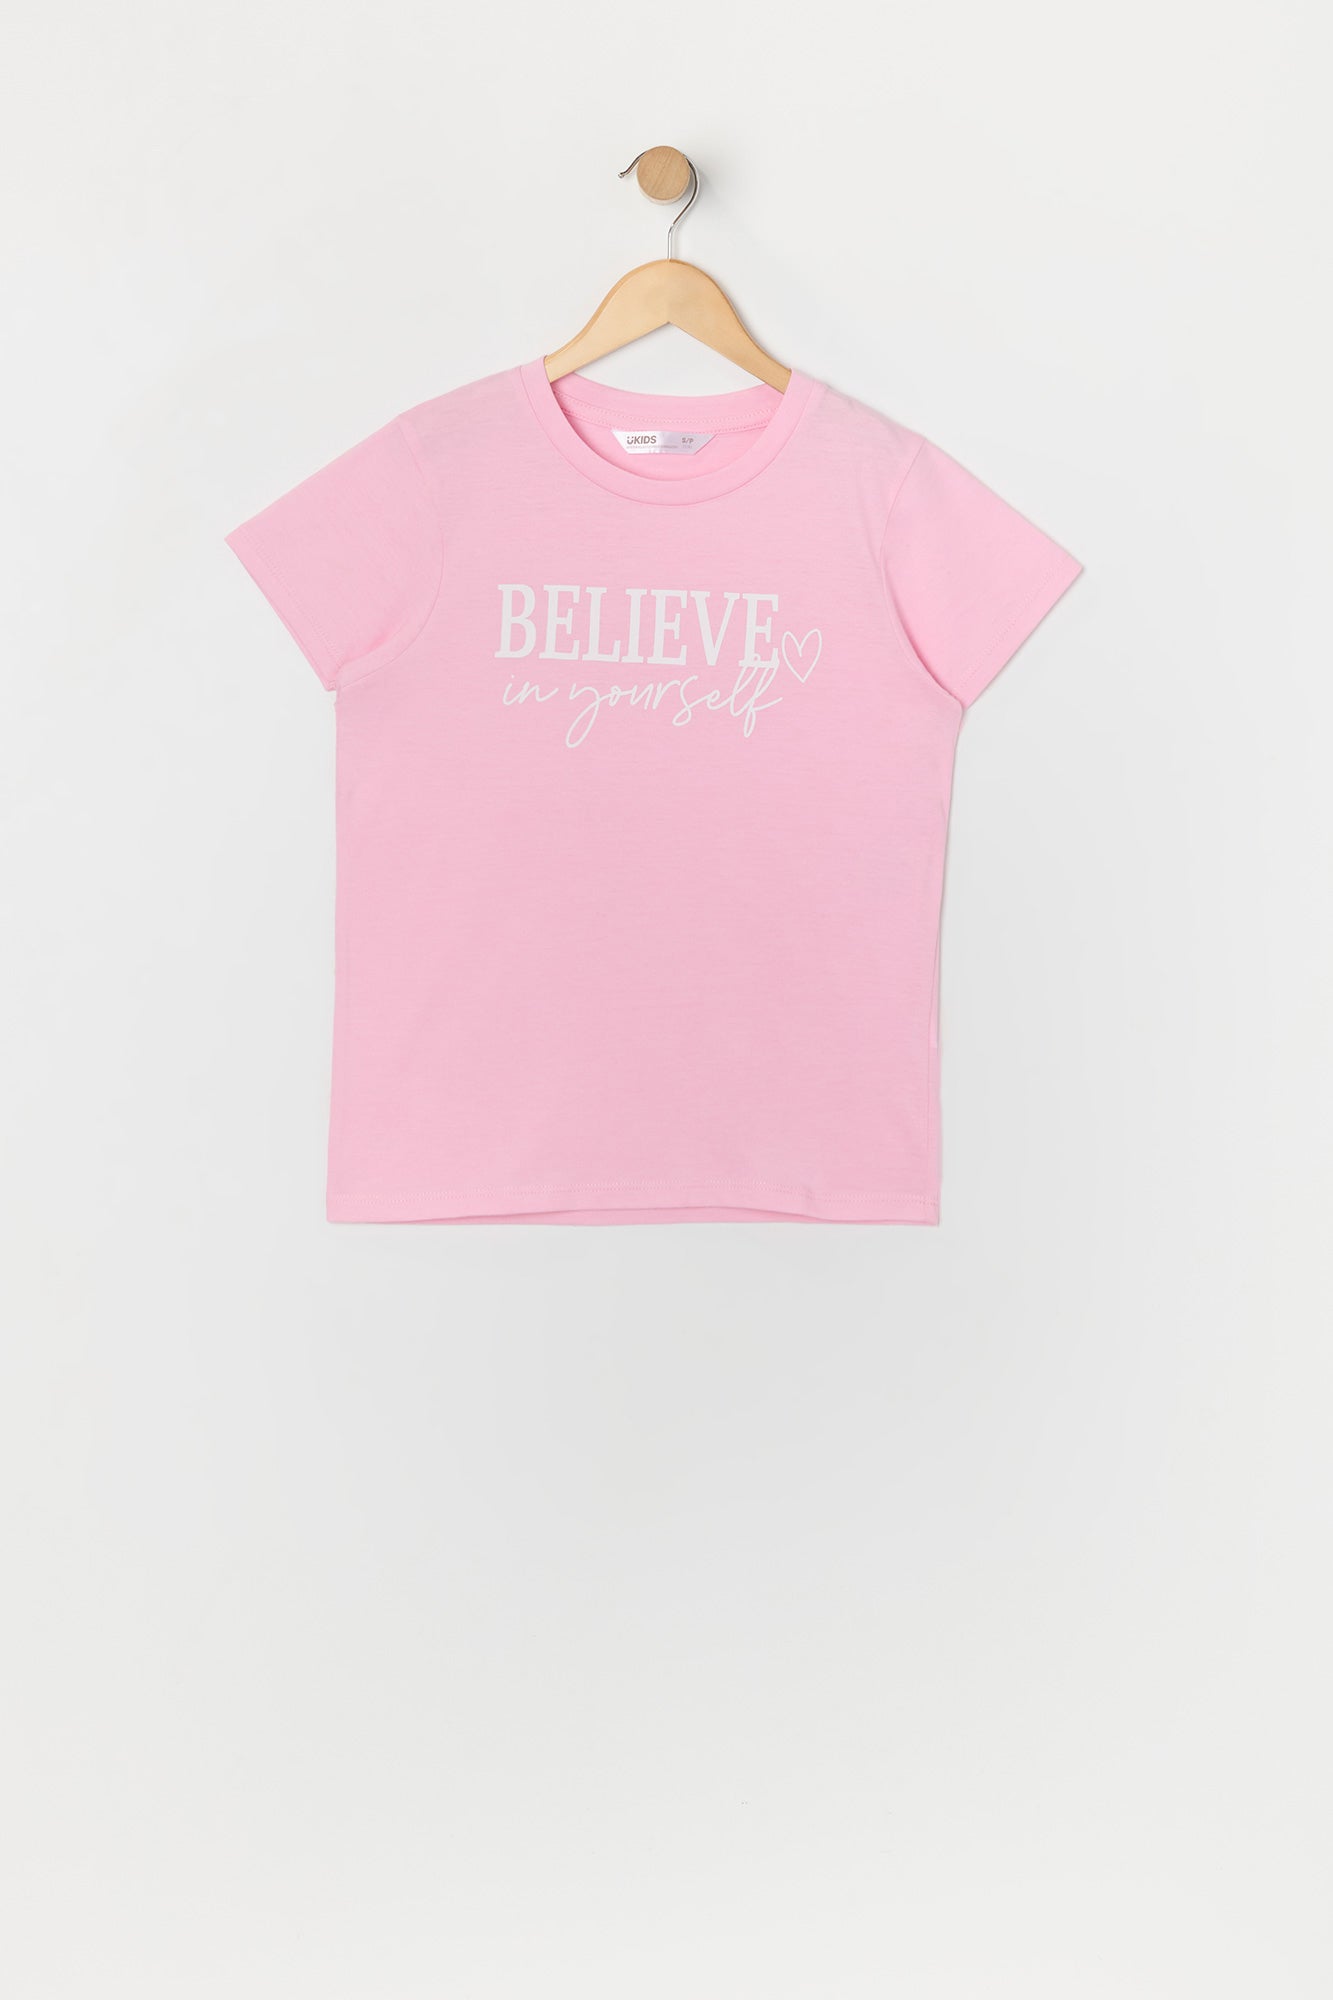 Girls Believe Yourself Graphic T-Shirt